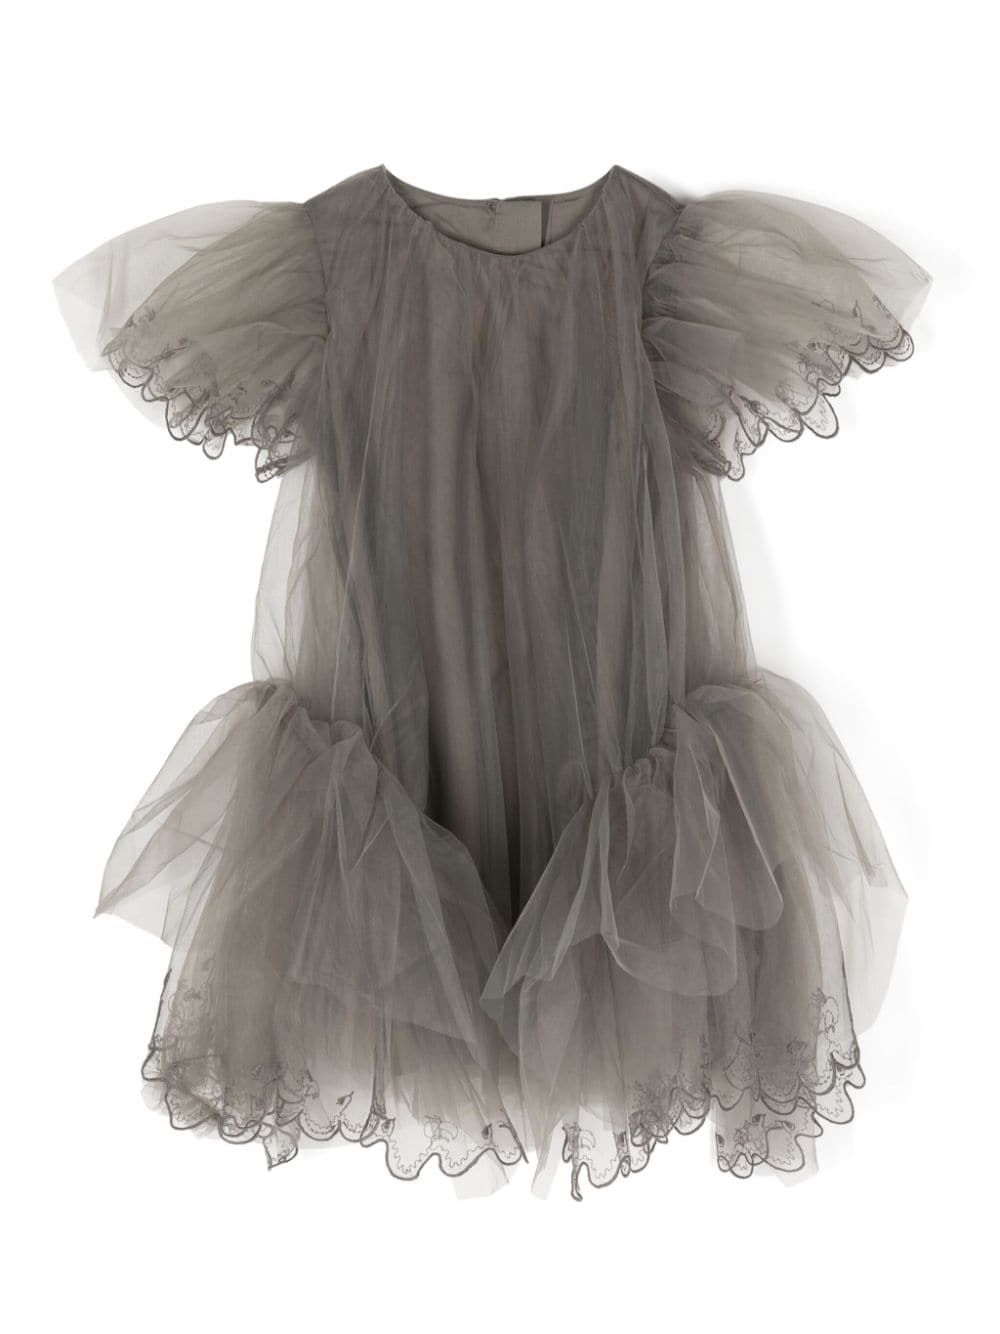 jnby by JNBY lace-trimmed tulle dress - Grey von jnby by JNBY